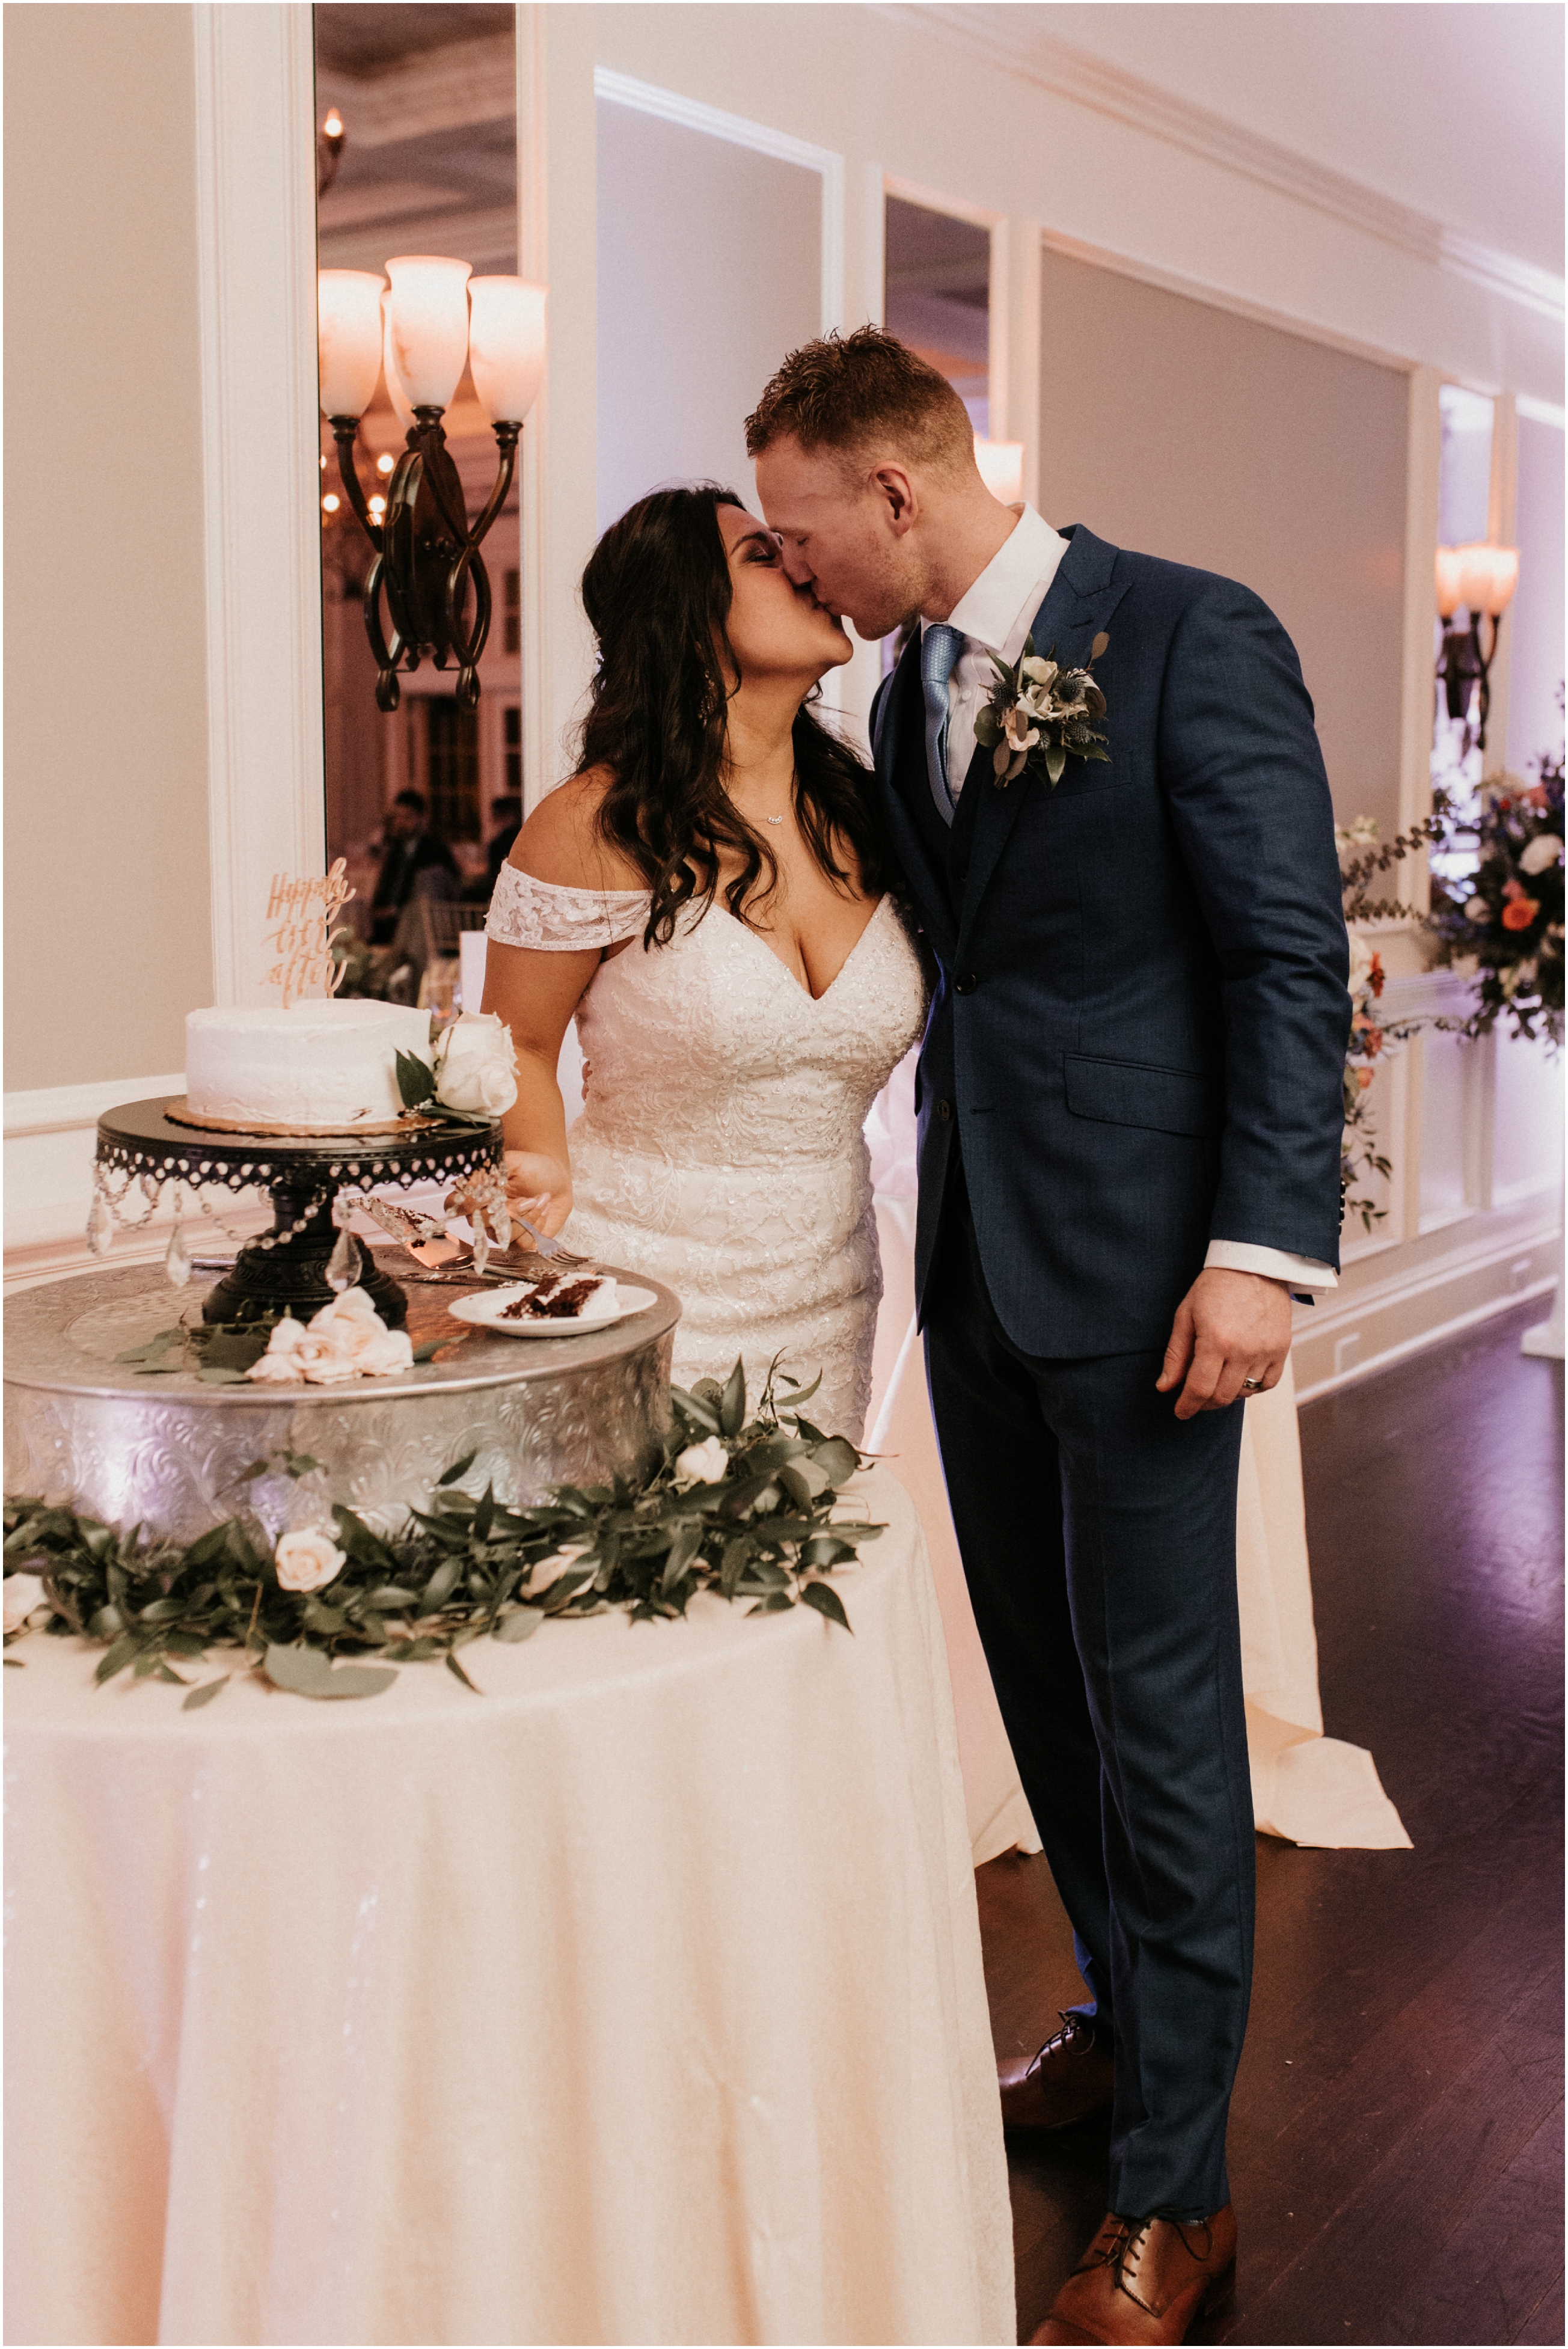 bride and groom cutting cake kiss